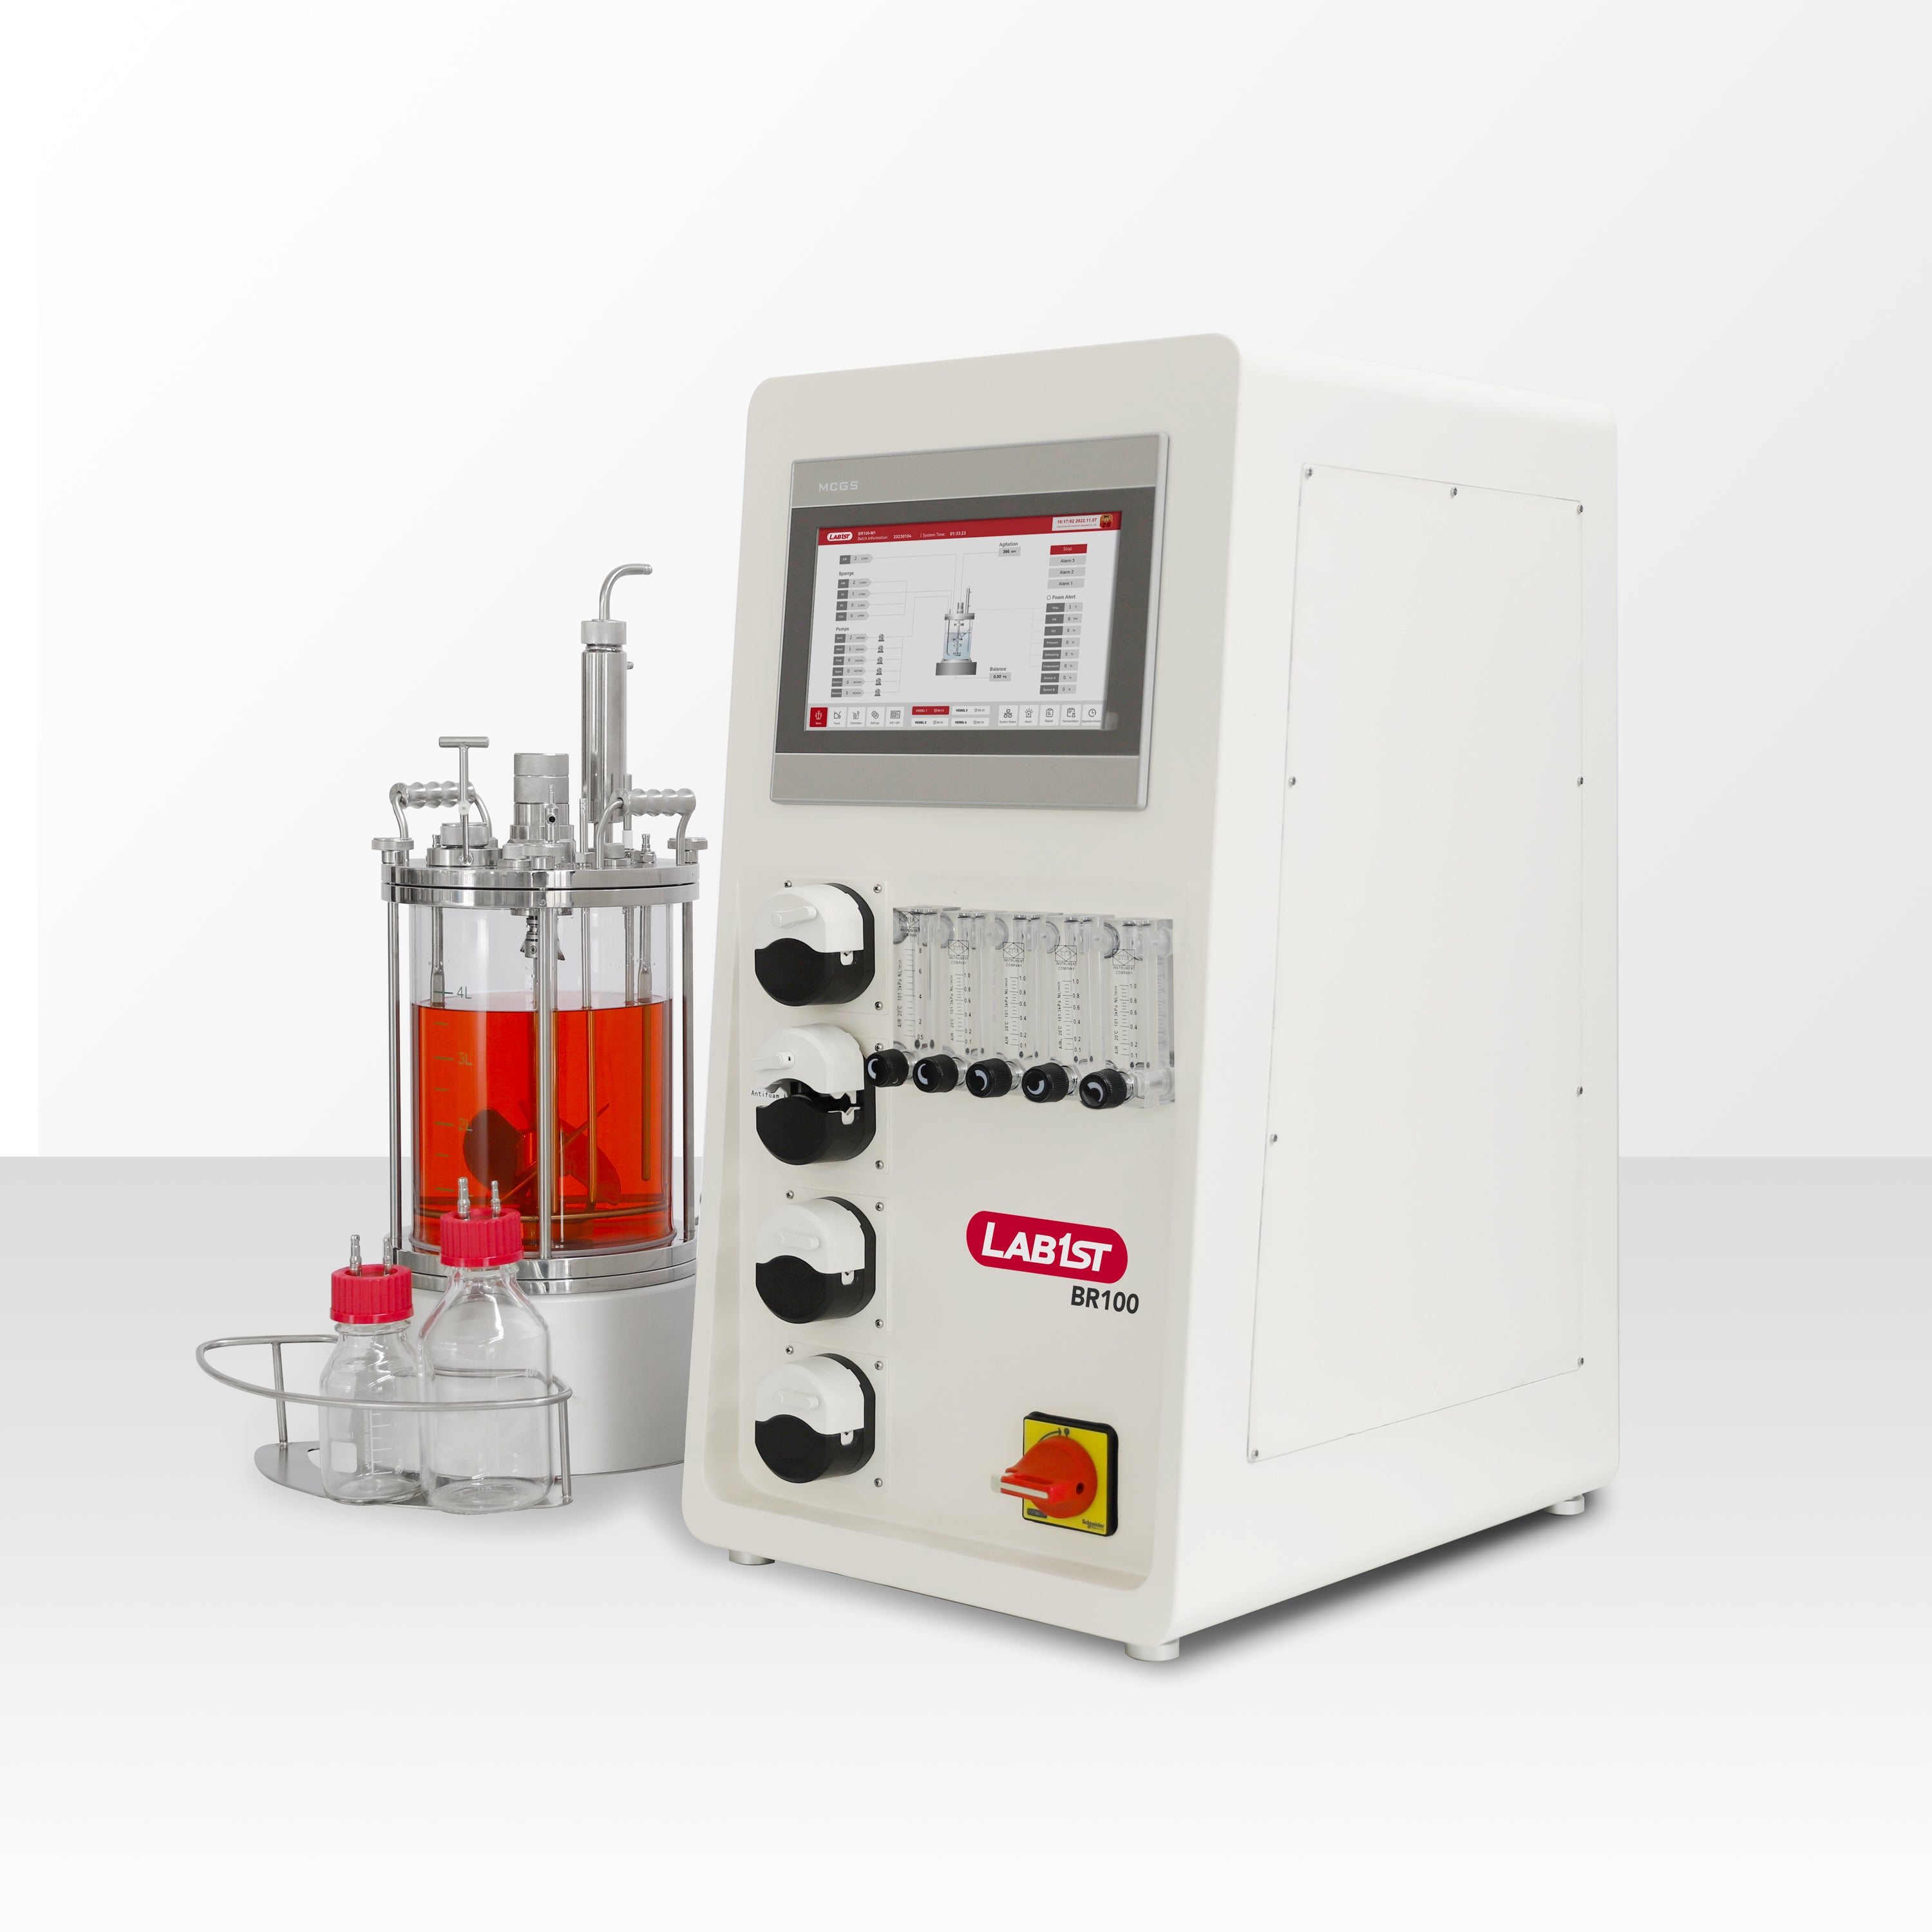 1L Benchtop Bioreactor for Microbial Fermentation with 2 Gas Inlets BR100-C1